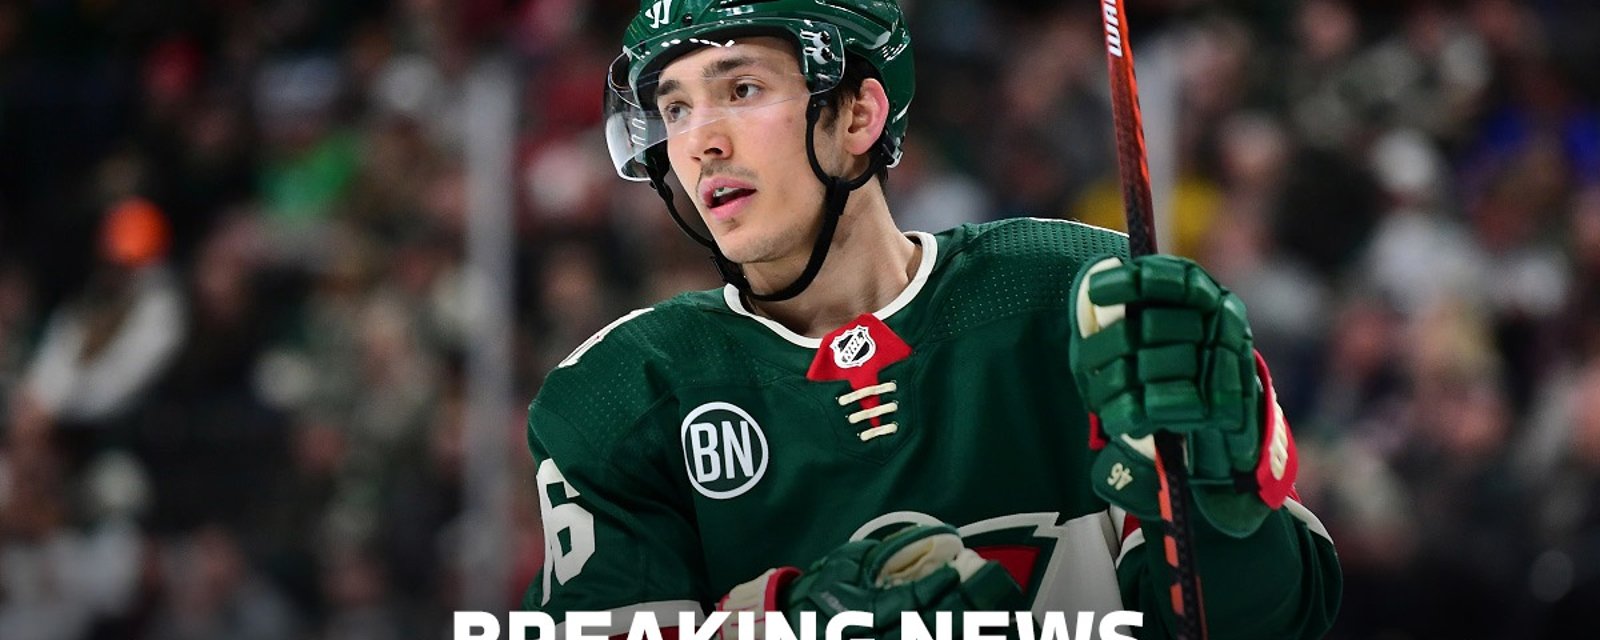 Breaking: Jared Spurgeon signs new deal worth over $50 million.